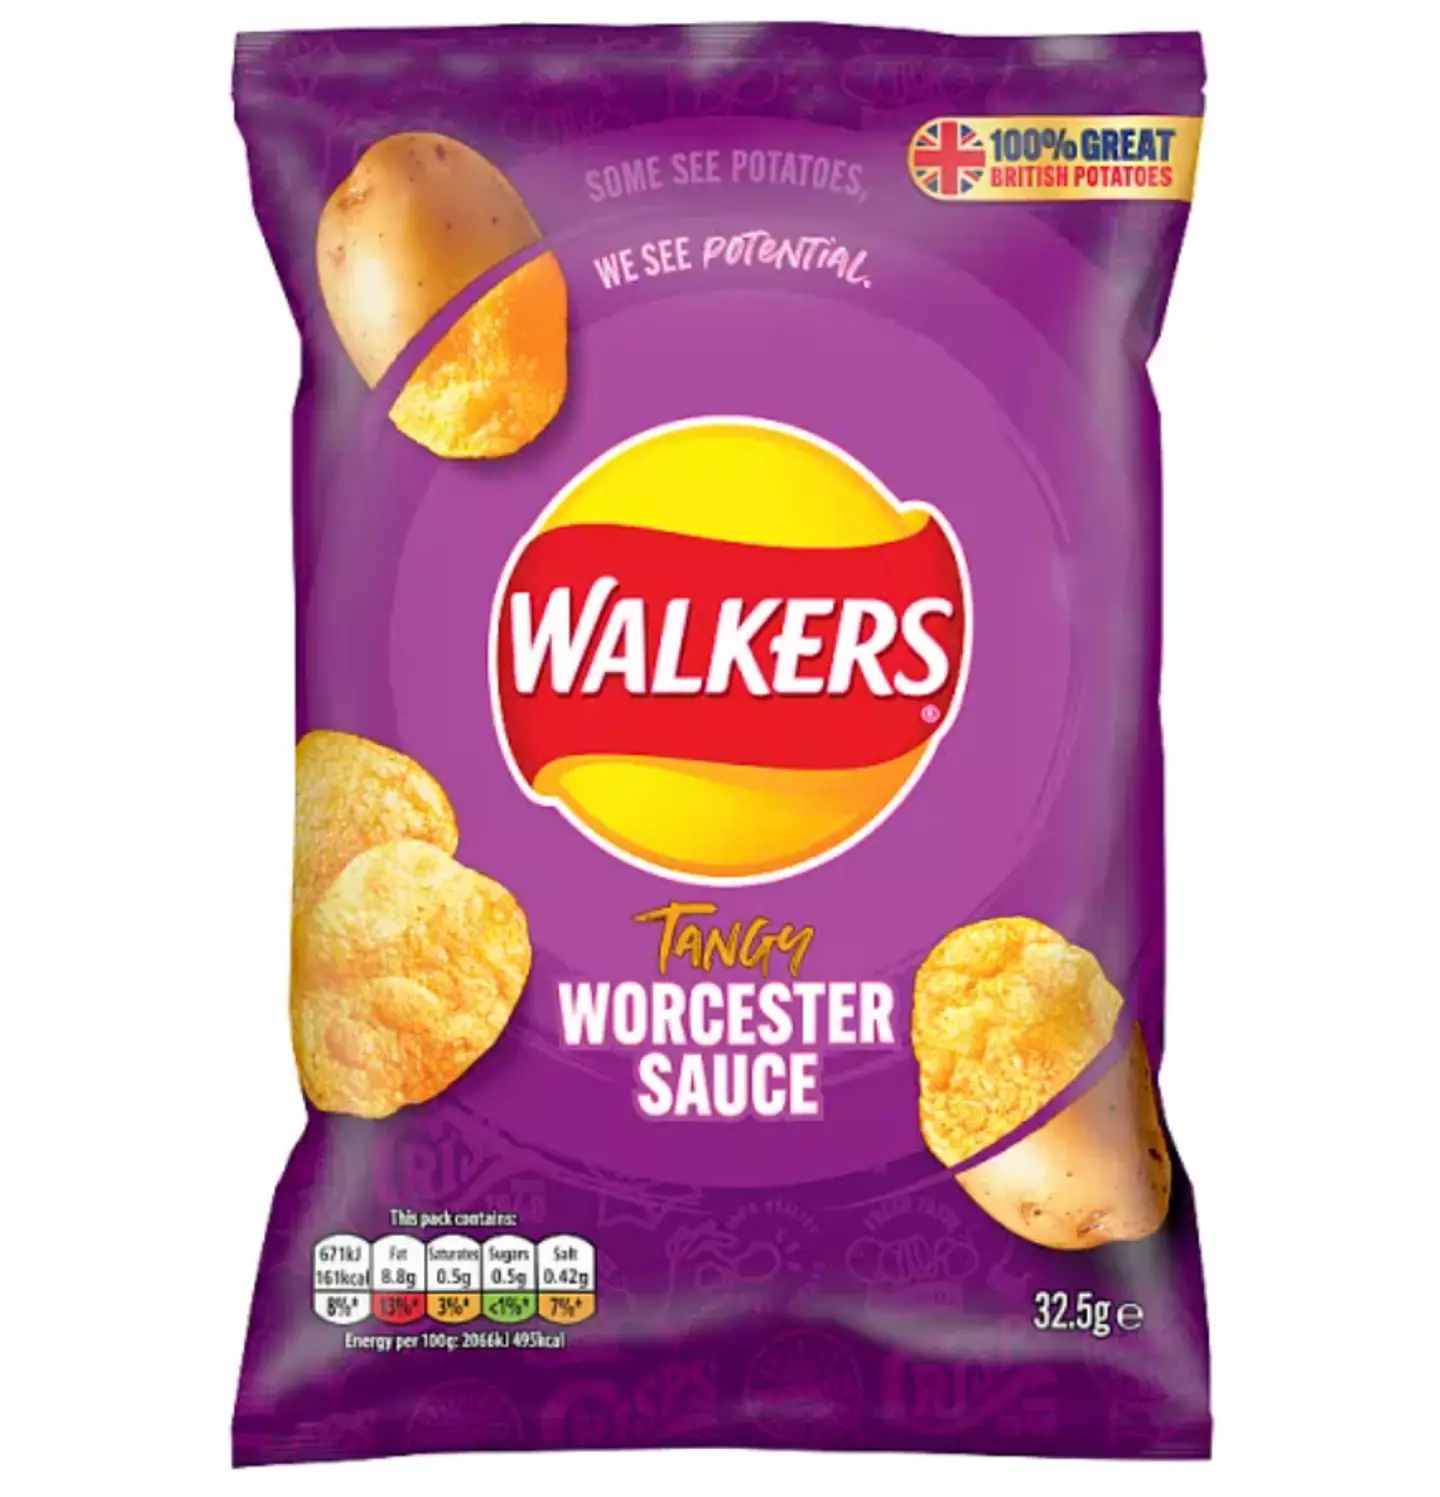 It seems Walkers worcester sauce flavour is now a thing of the past.